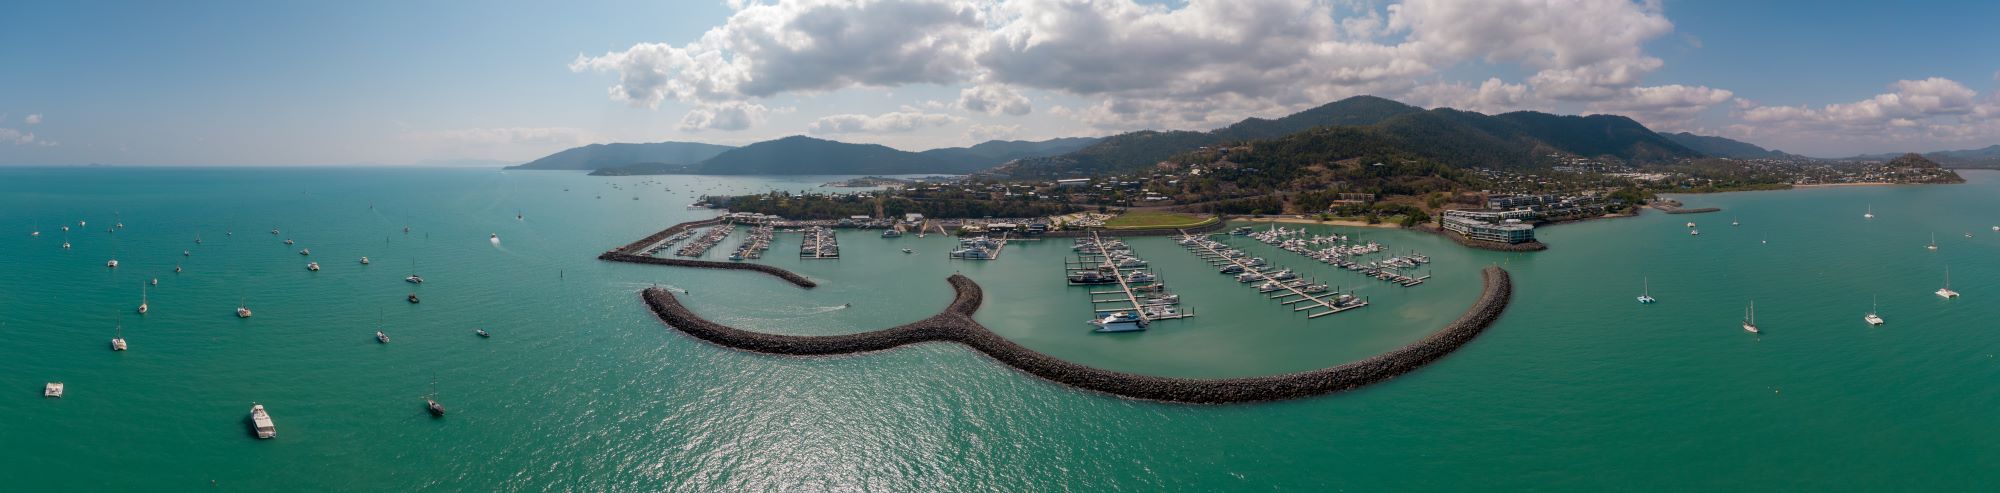 Aerial view of Airlie Beach from the ocean